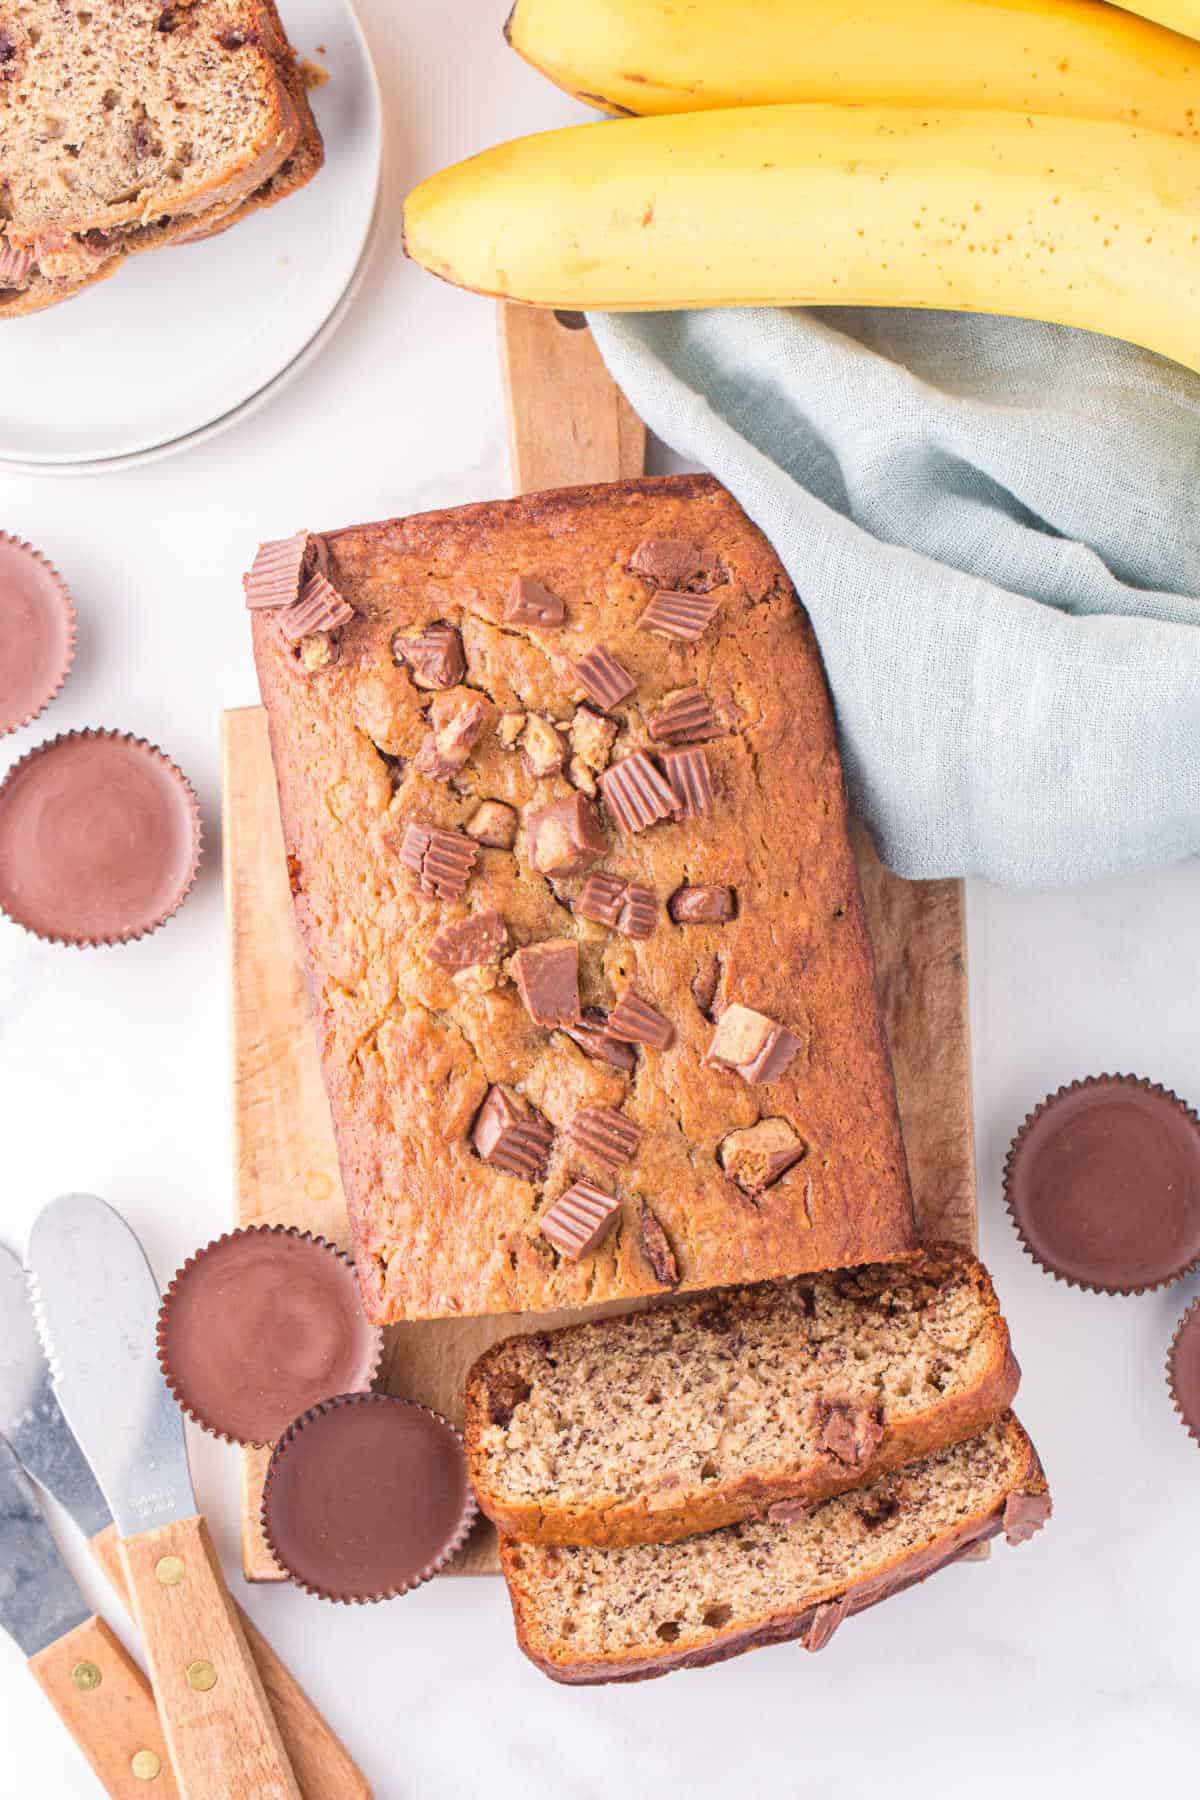 A loaf of Reese's peanut butter banana bread with two slices cut off the end.